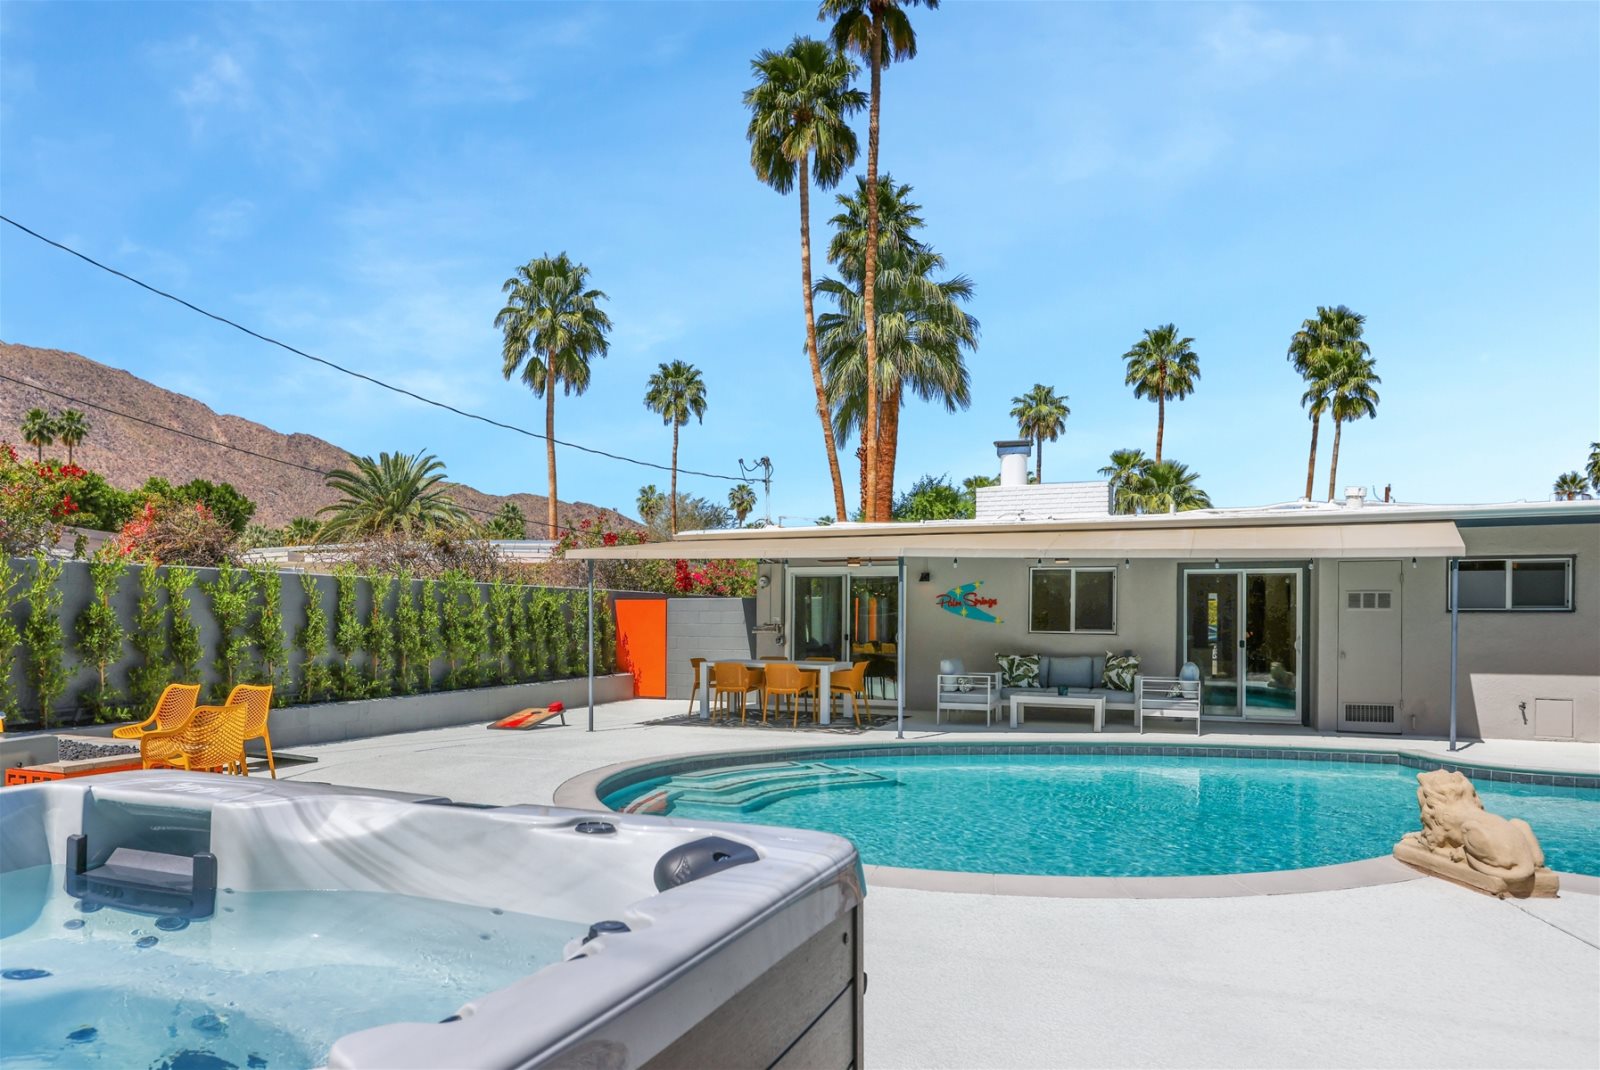 Palm Springs Vacation Rental Pool Home - Palm Springs Sun and Fun